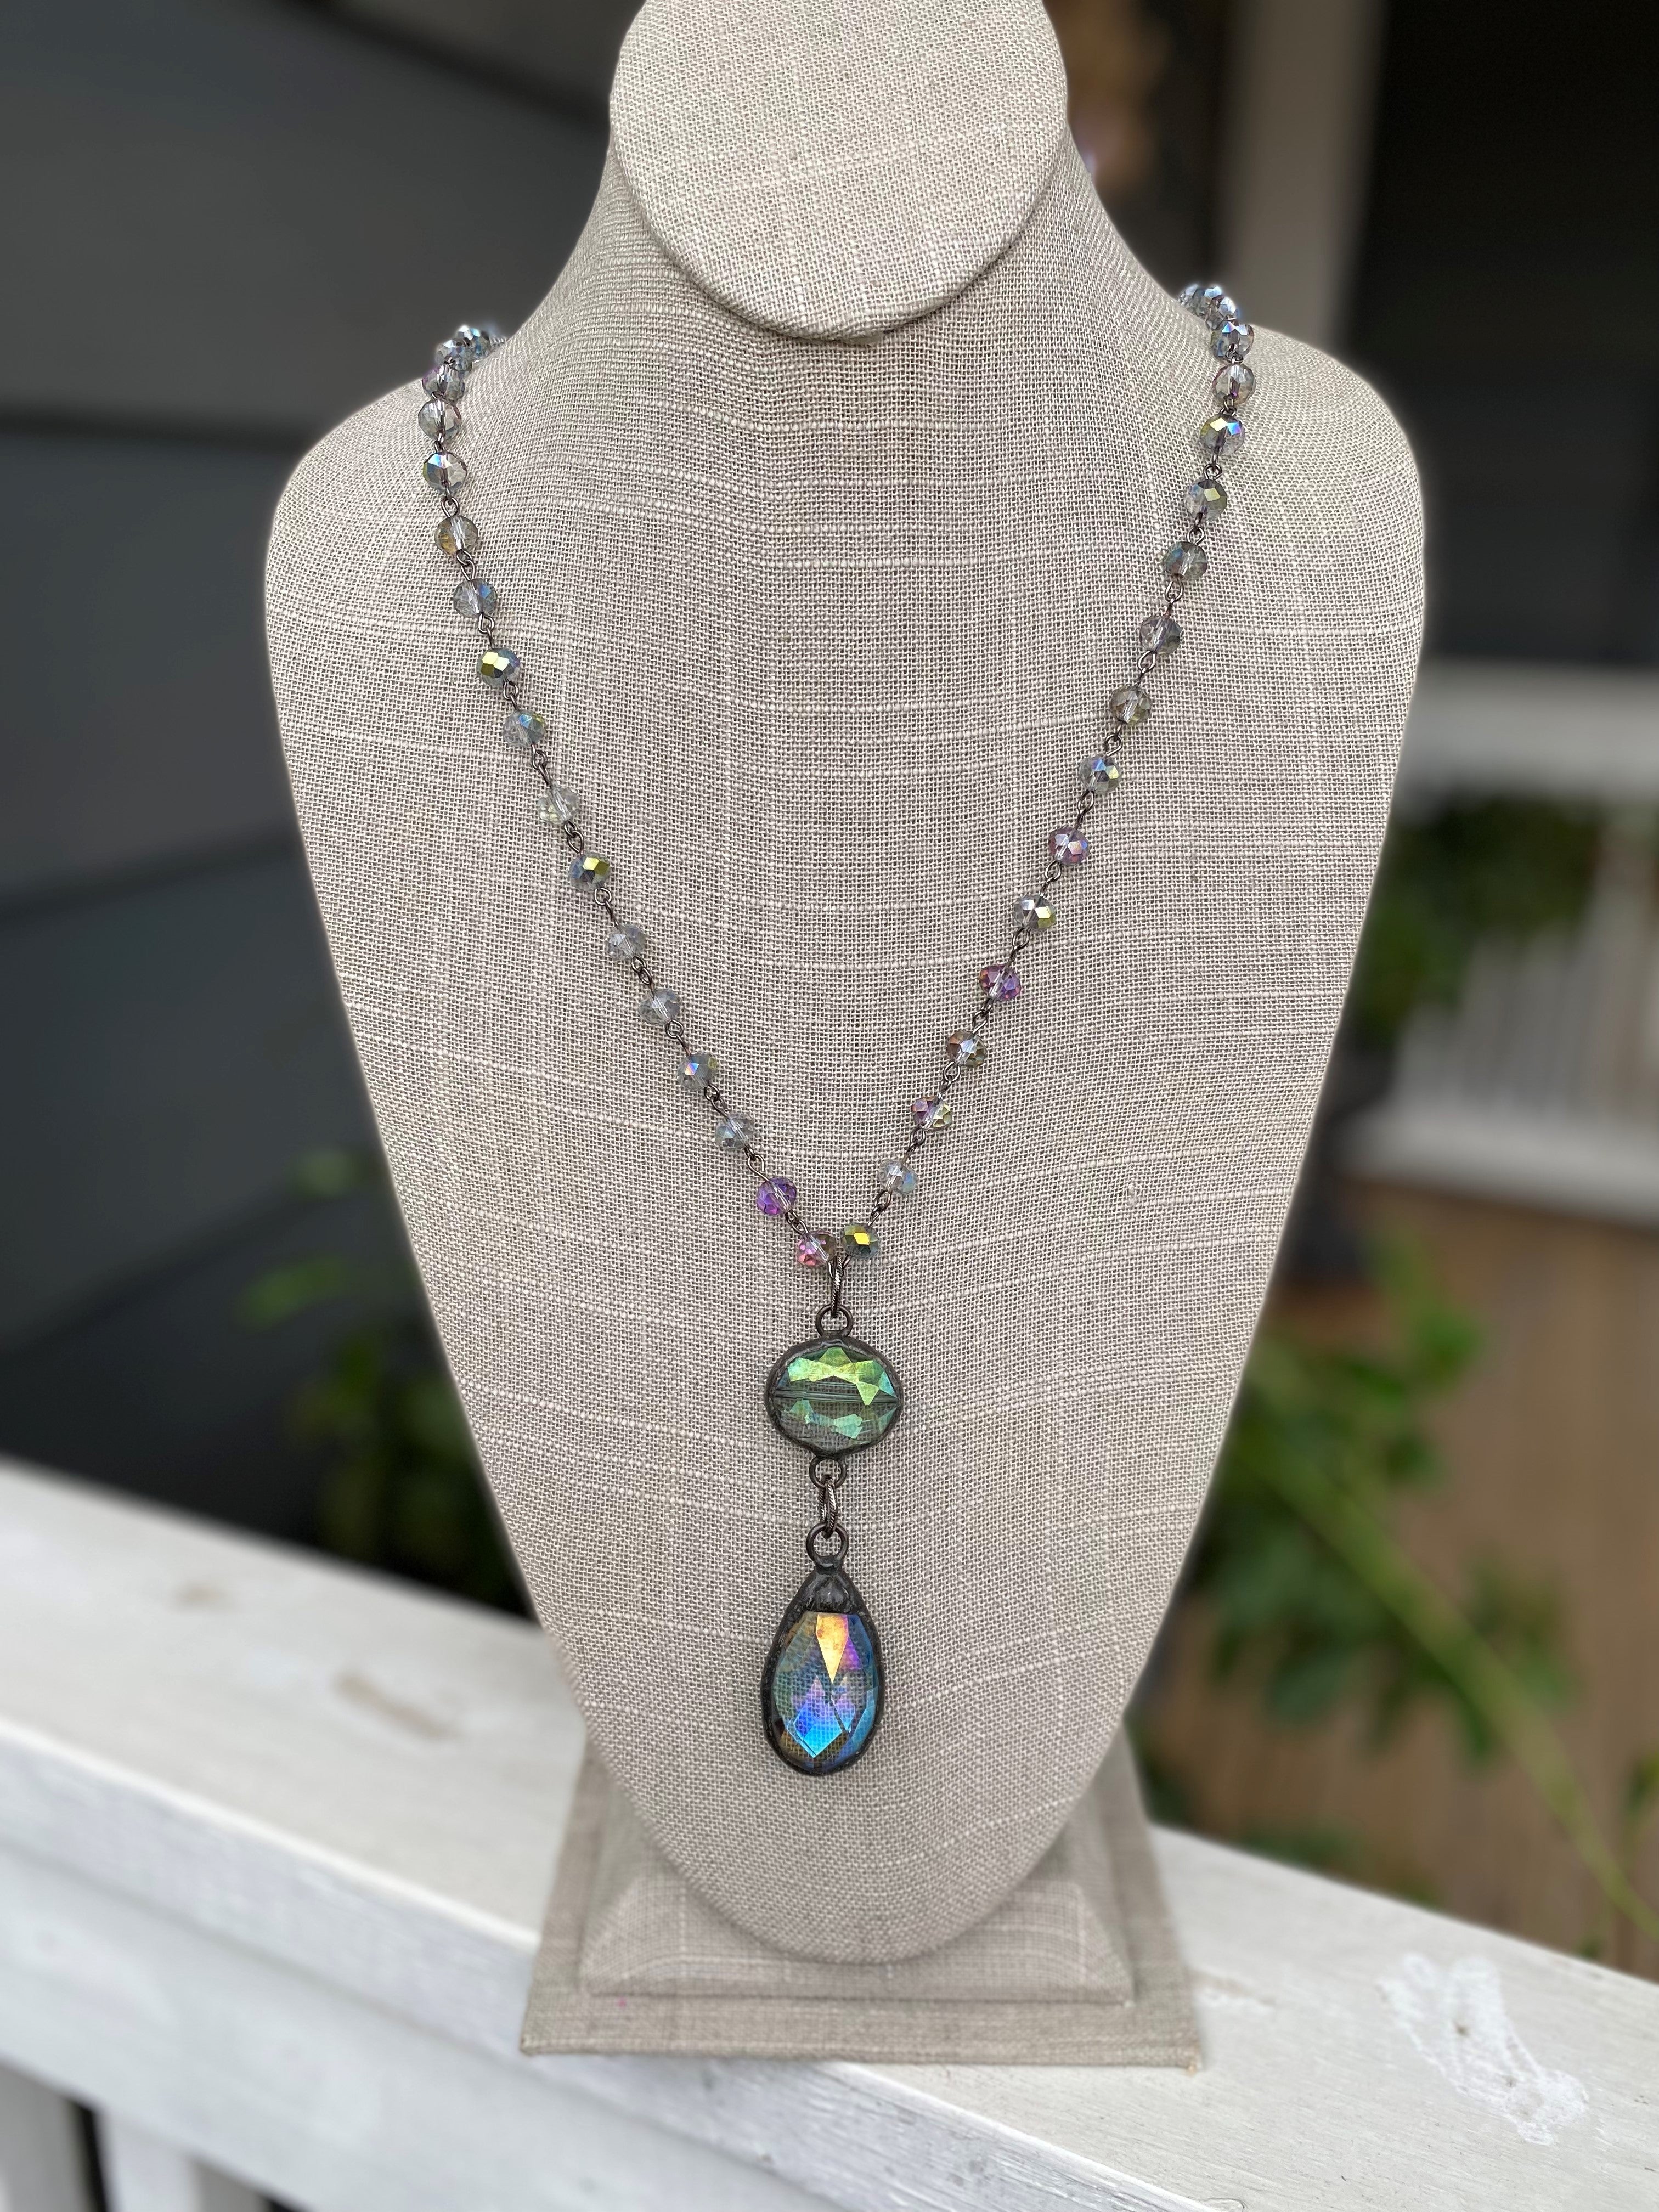 Double Drop Necklace with Large Crystal Teardrop